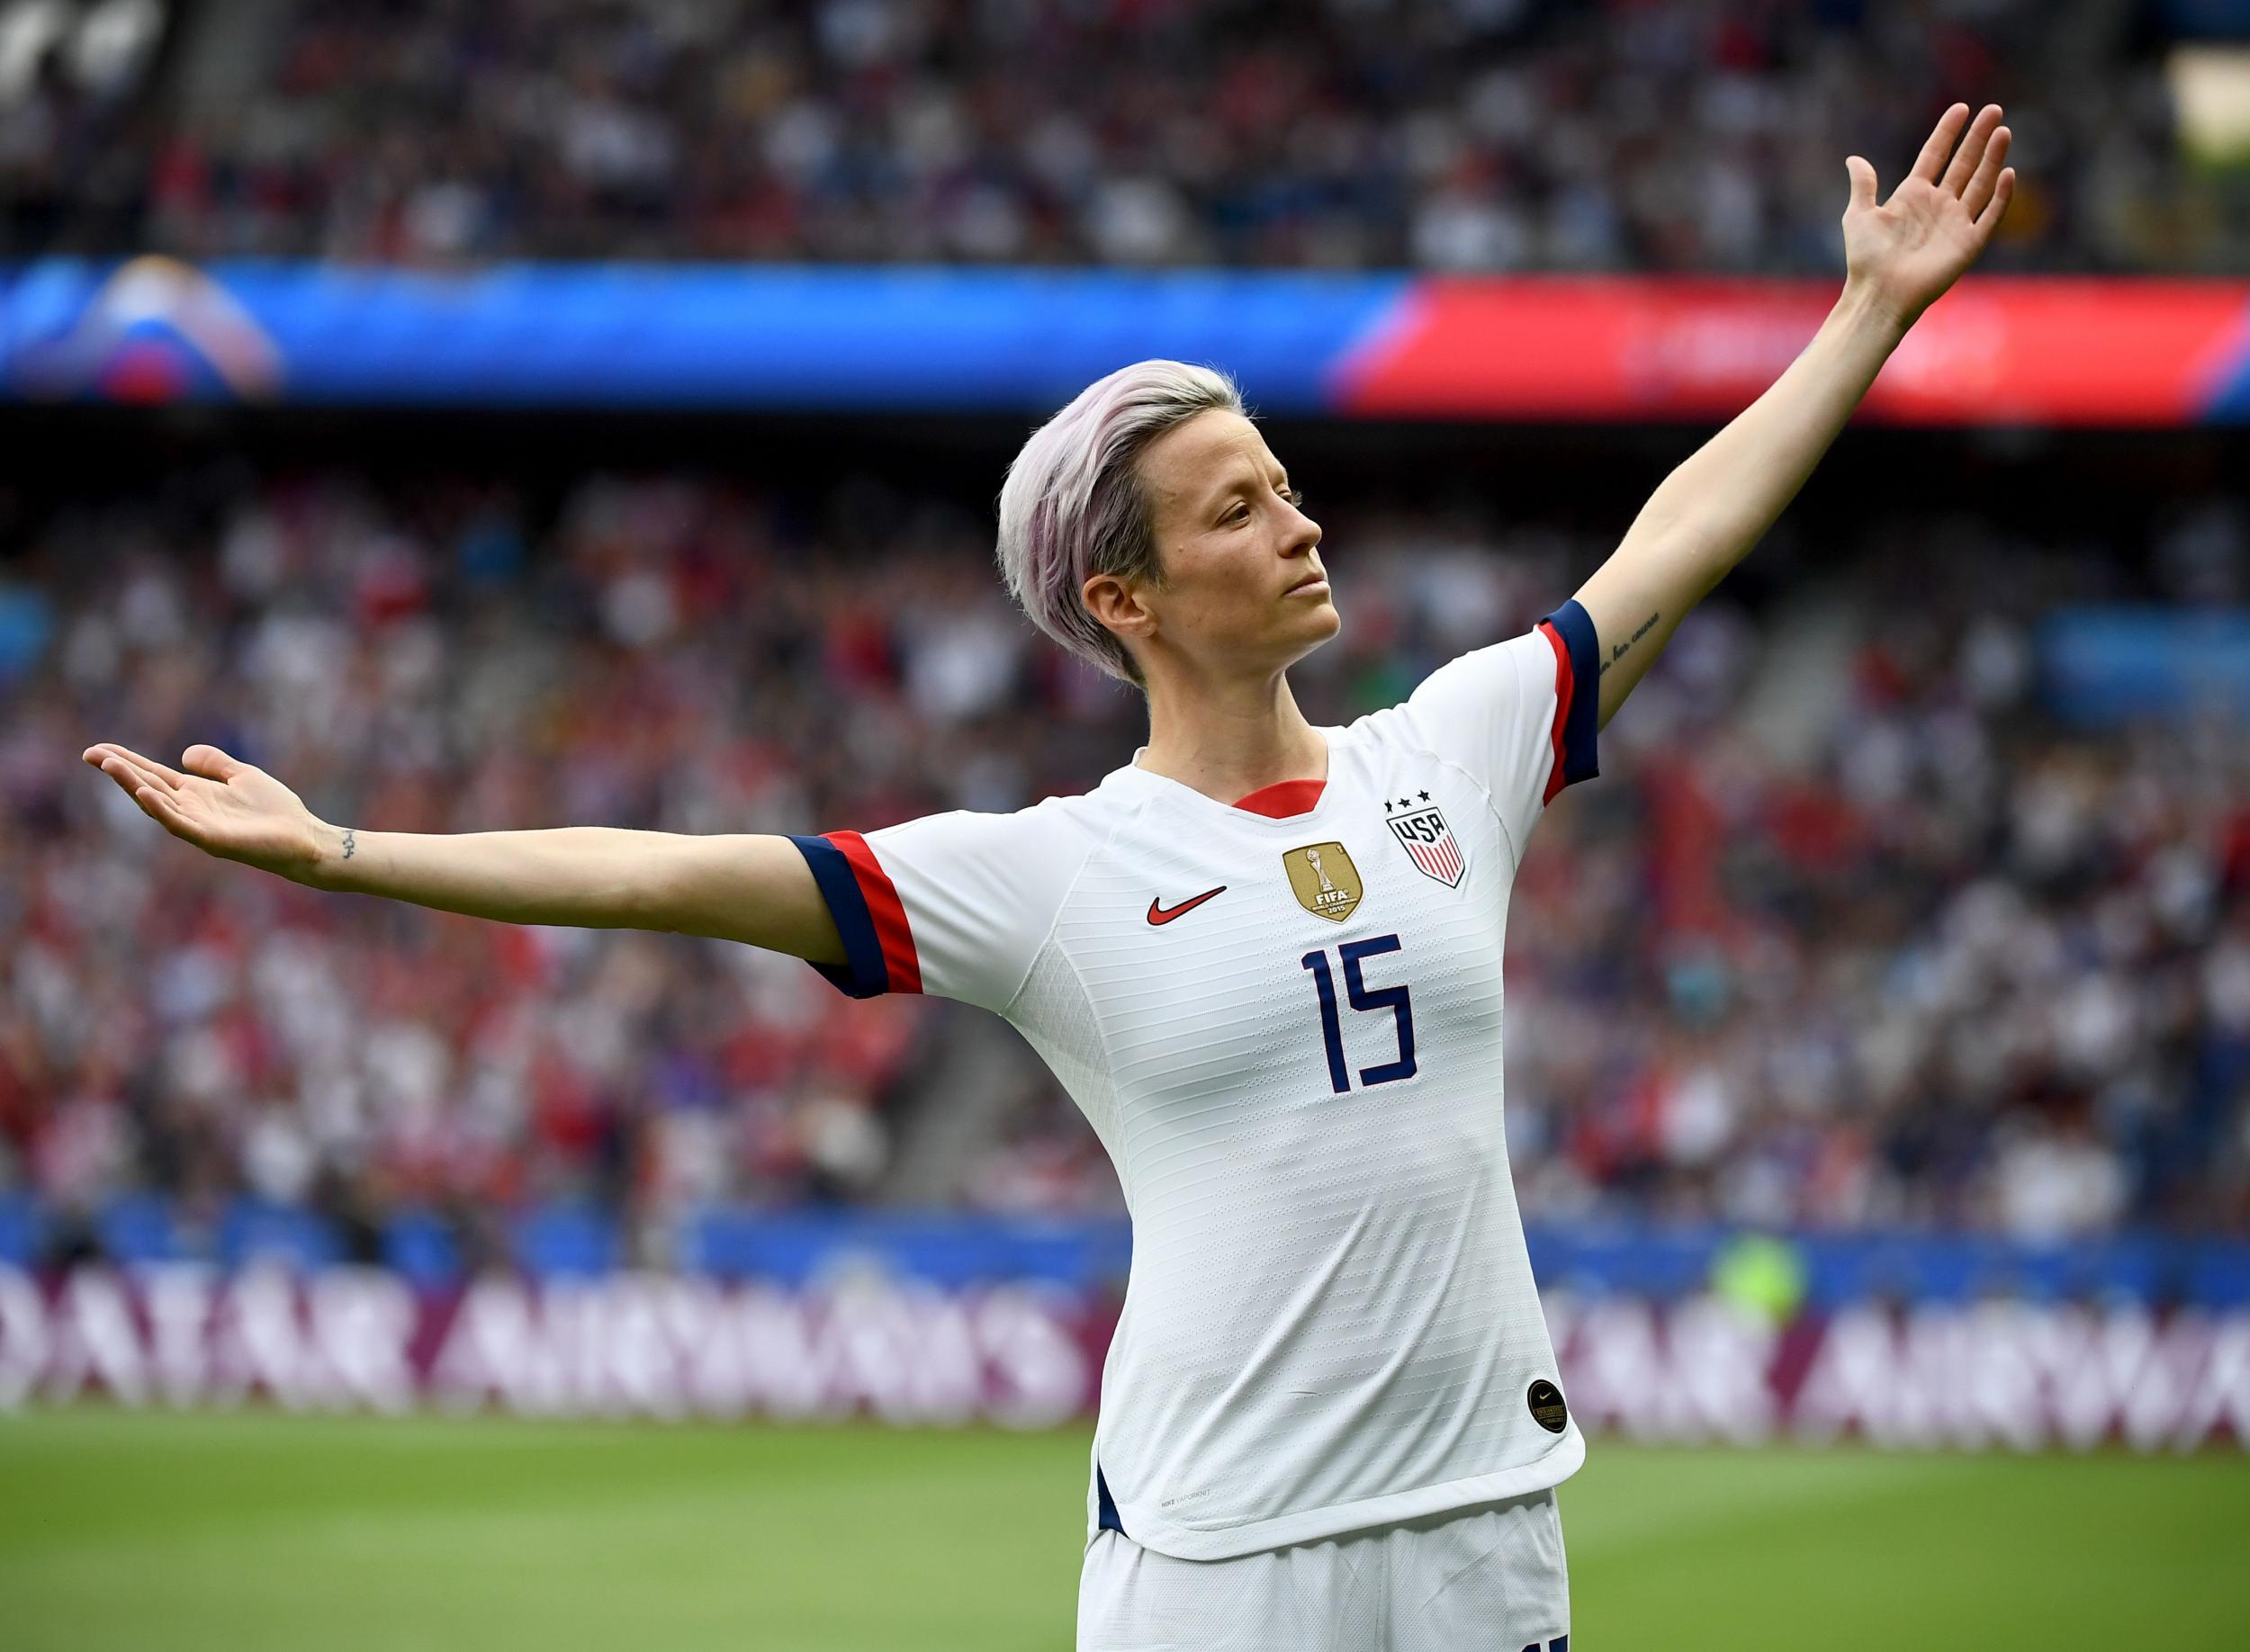 Rapinoe has been vocal about the battle to secure equal pay (AFP via Getty)